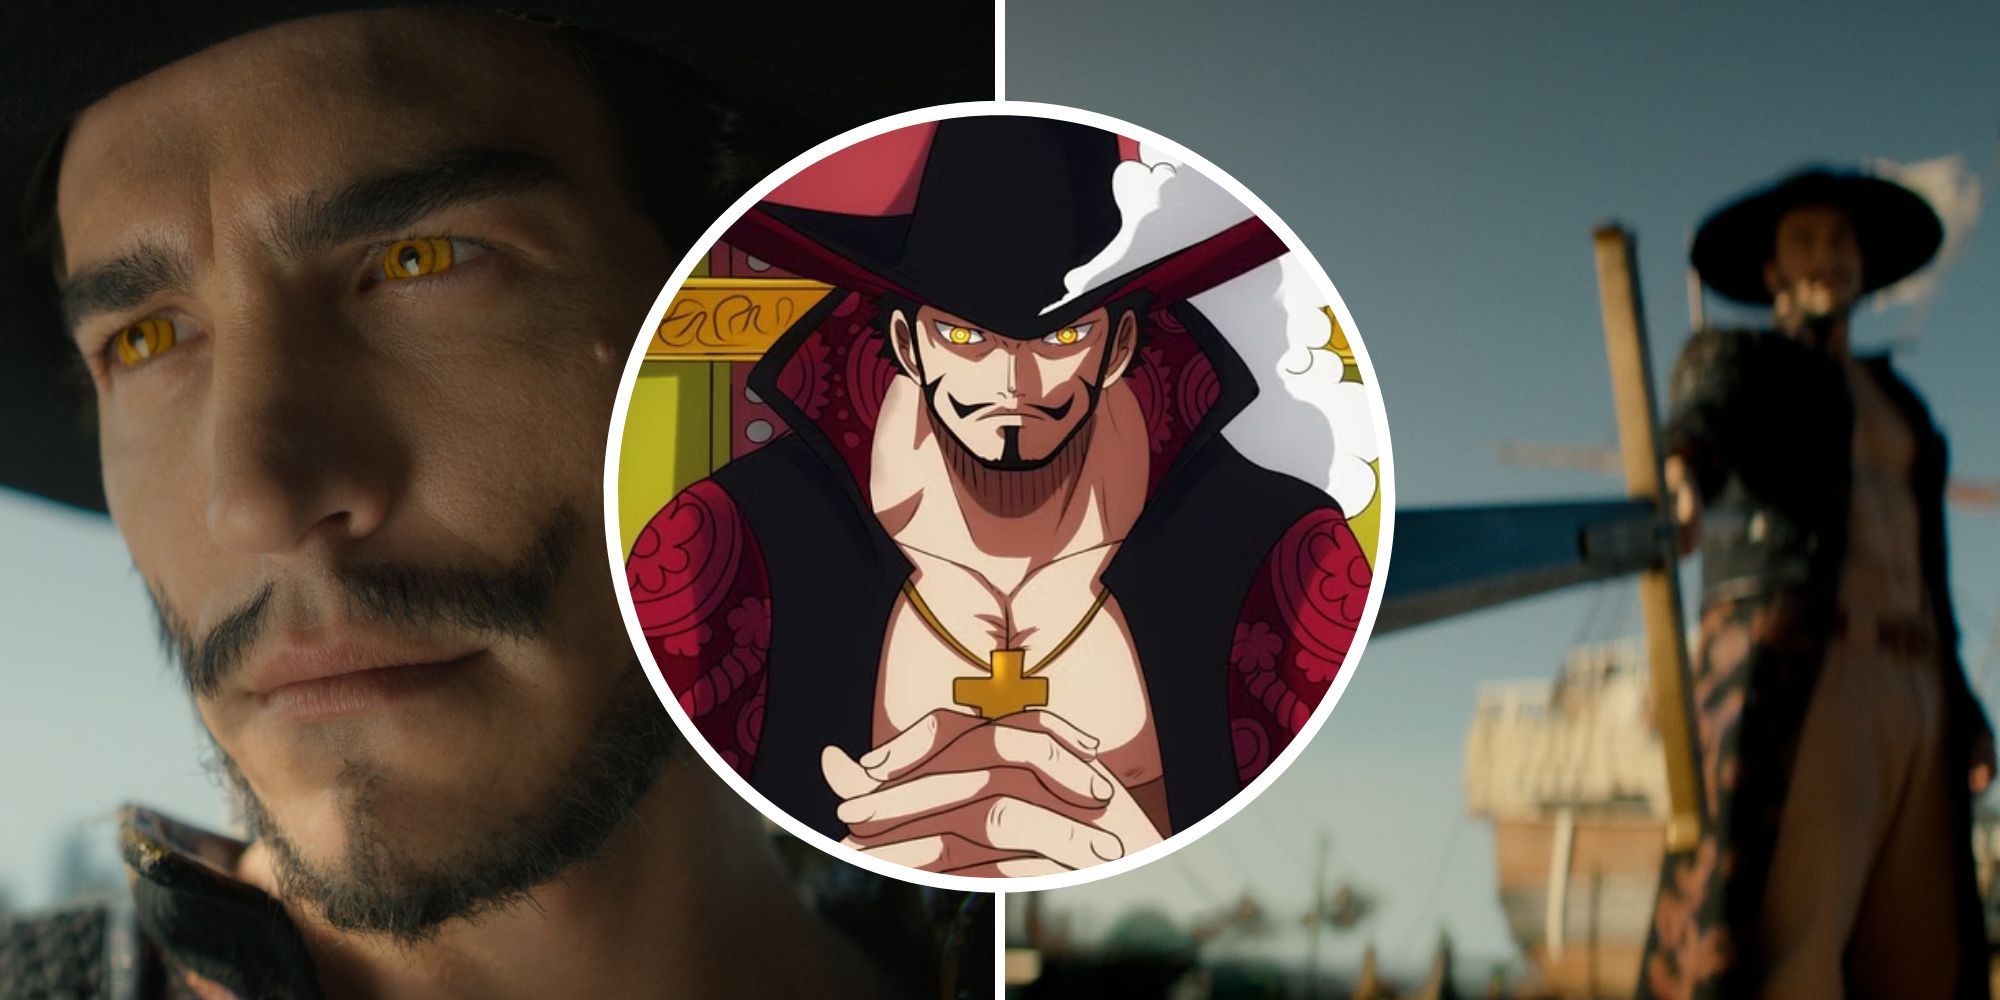 The Will of Marco (マルコの意志) on X: Dracule Hawk-Eyes Mihawk in One Piece  Live Action! 🦅👁️ Look at the details on Yoru! 🔥🔥🔥 #ONEPIECE  #ONEPIECEDAY #ONEPIECELIVEACTION  / X